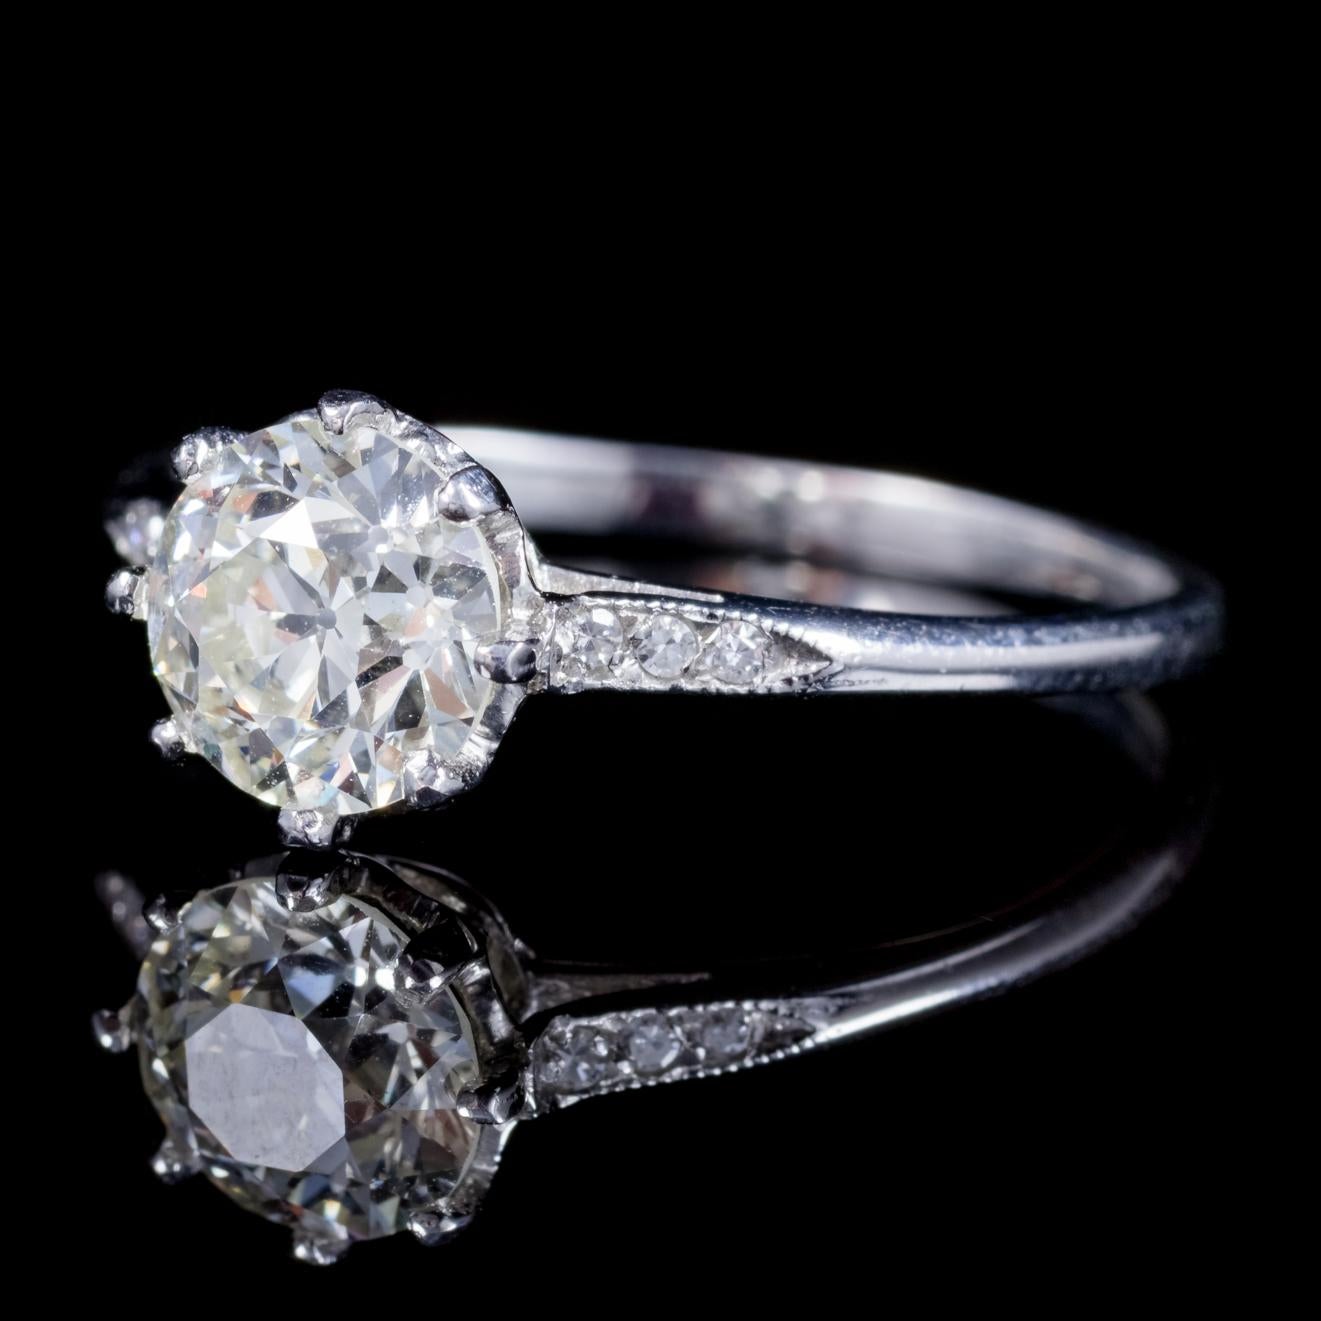 A spectacular antique Edwardian 18ct White Gold solitaire ring C. 1910, adorned with a magnificent 1.16ct old Cut Diamond.

The central old cut is a beautiful VS1 clarity - I Colour Diamond and flanked by smaller old cut Diamonds down each